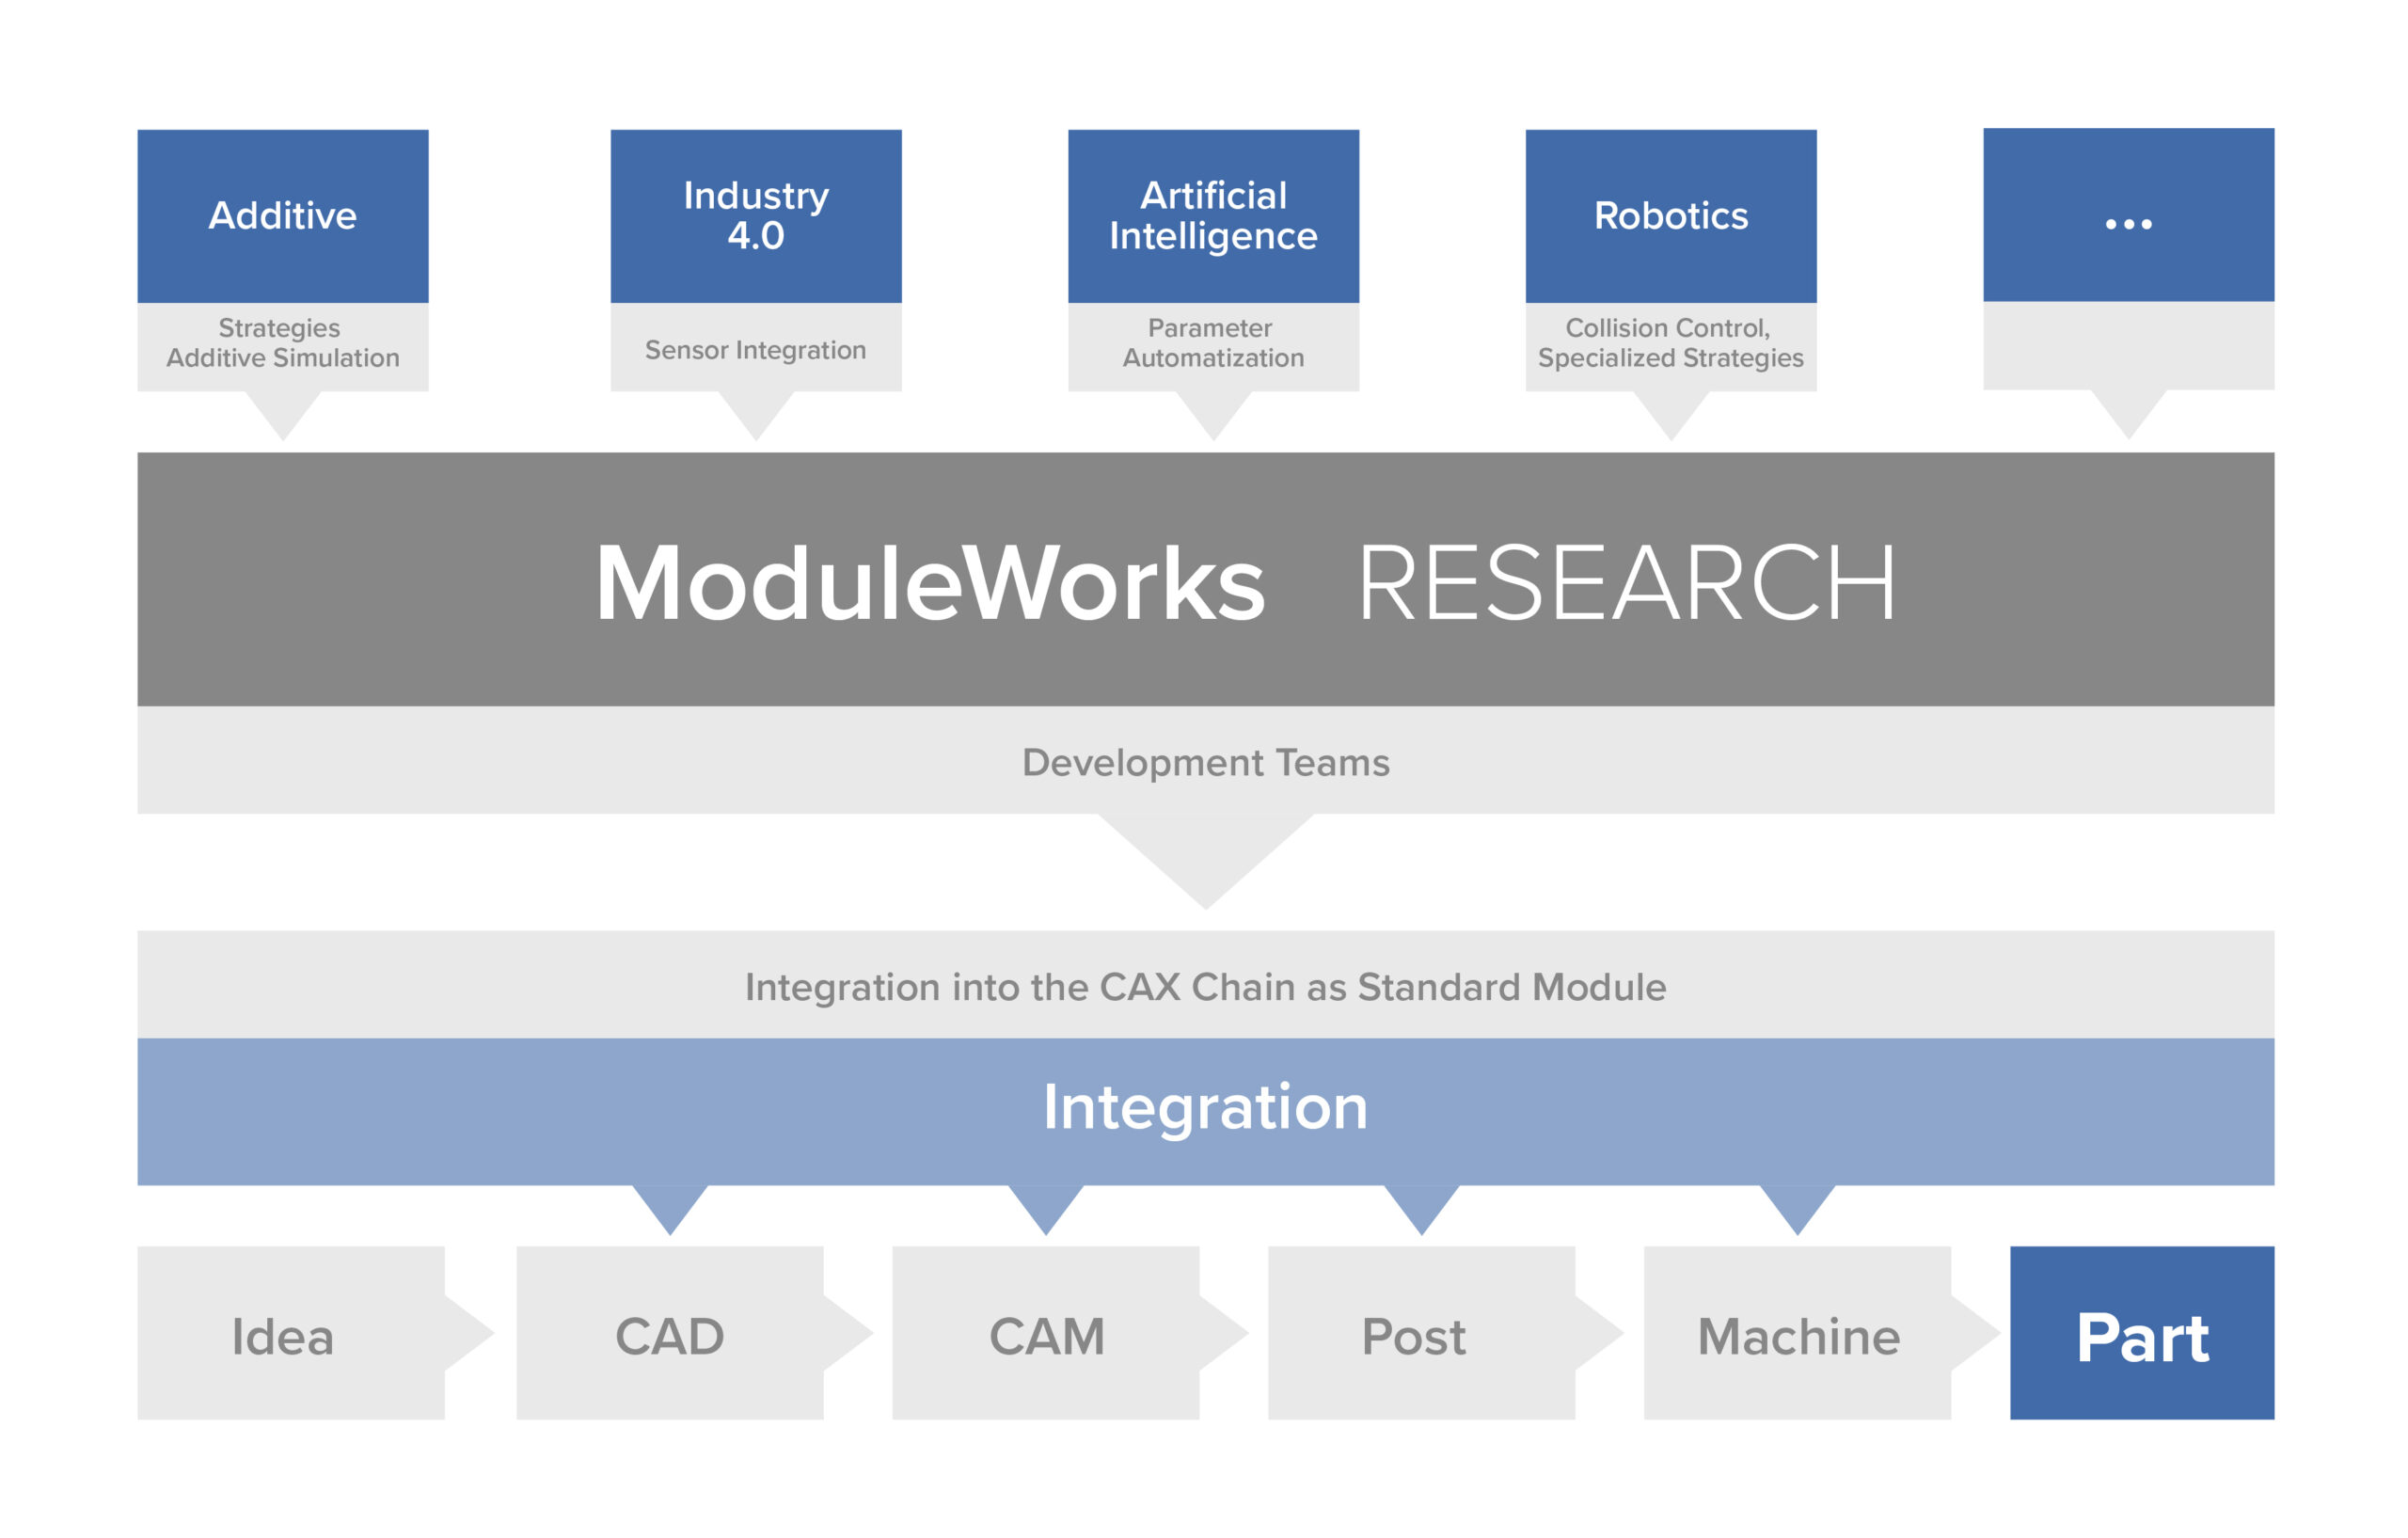 ModuleWorks Research